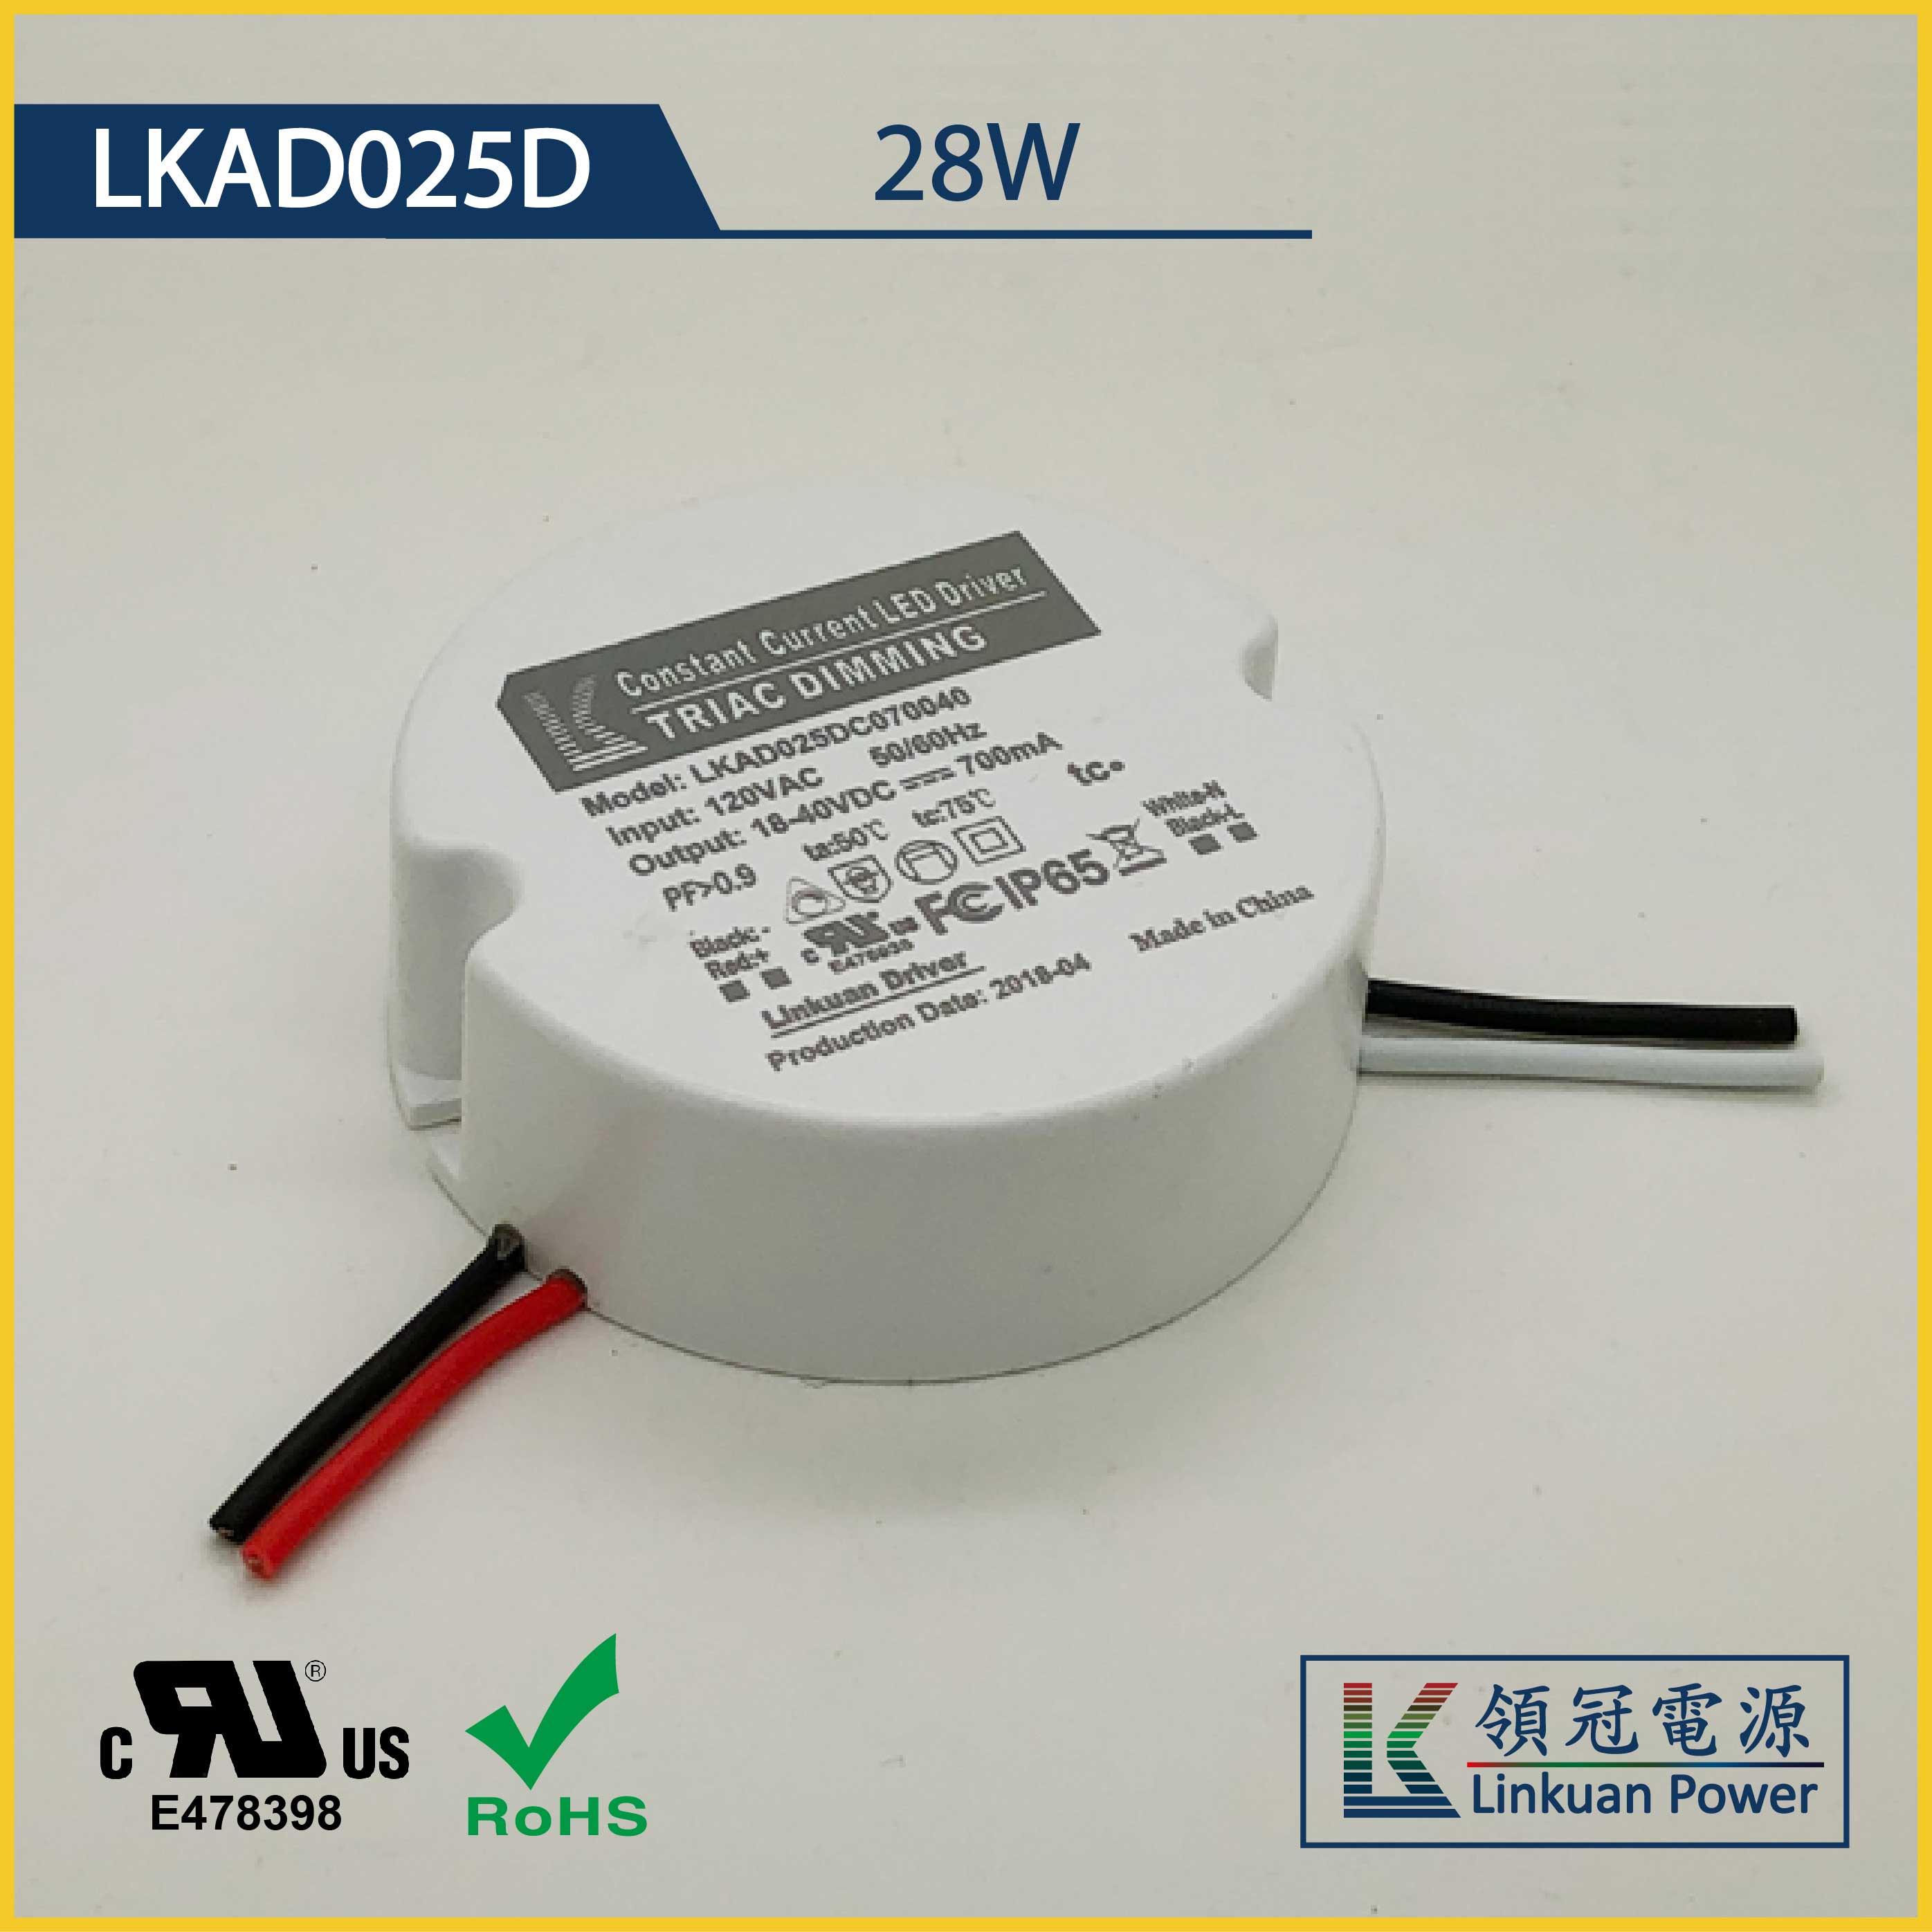 LKAD025D 28W 9-20V 1200 Dimmable LED drivers